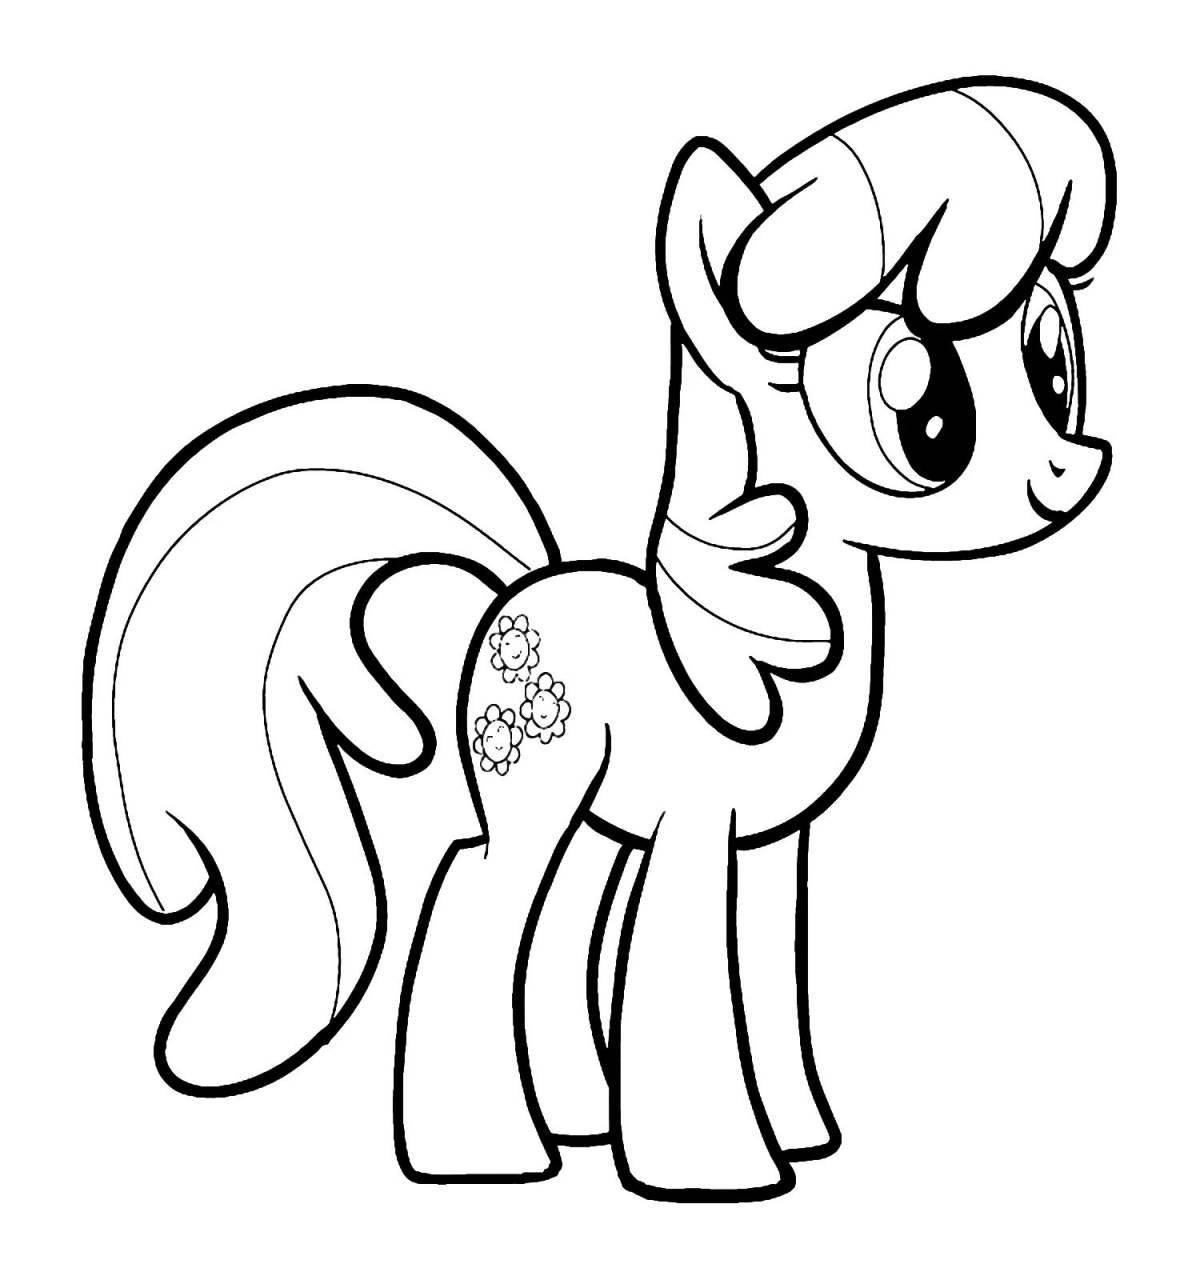 Brilliant pip pony coloring page